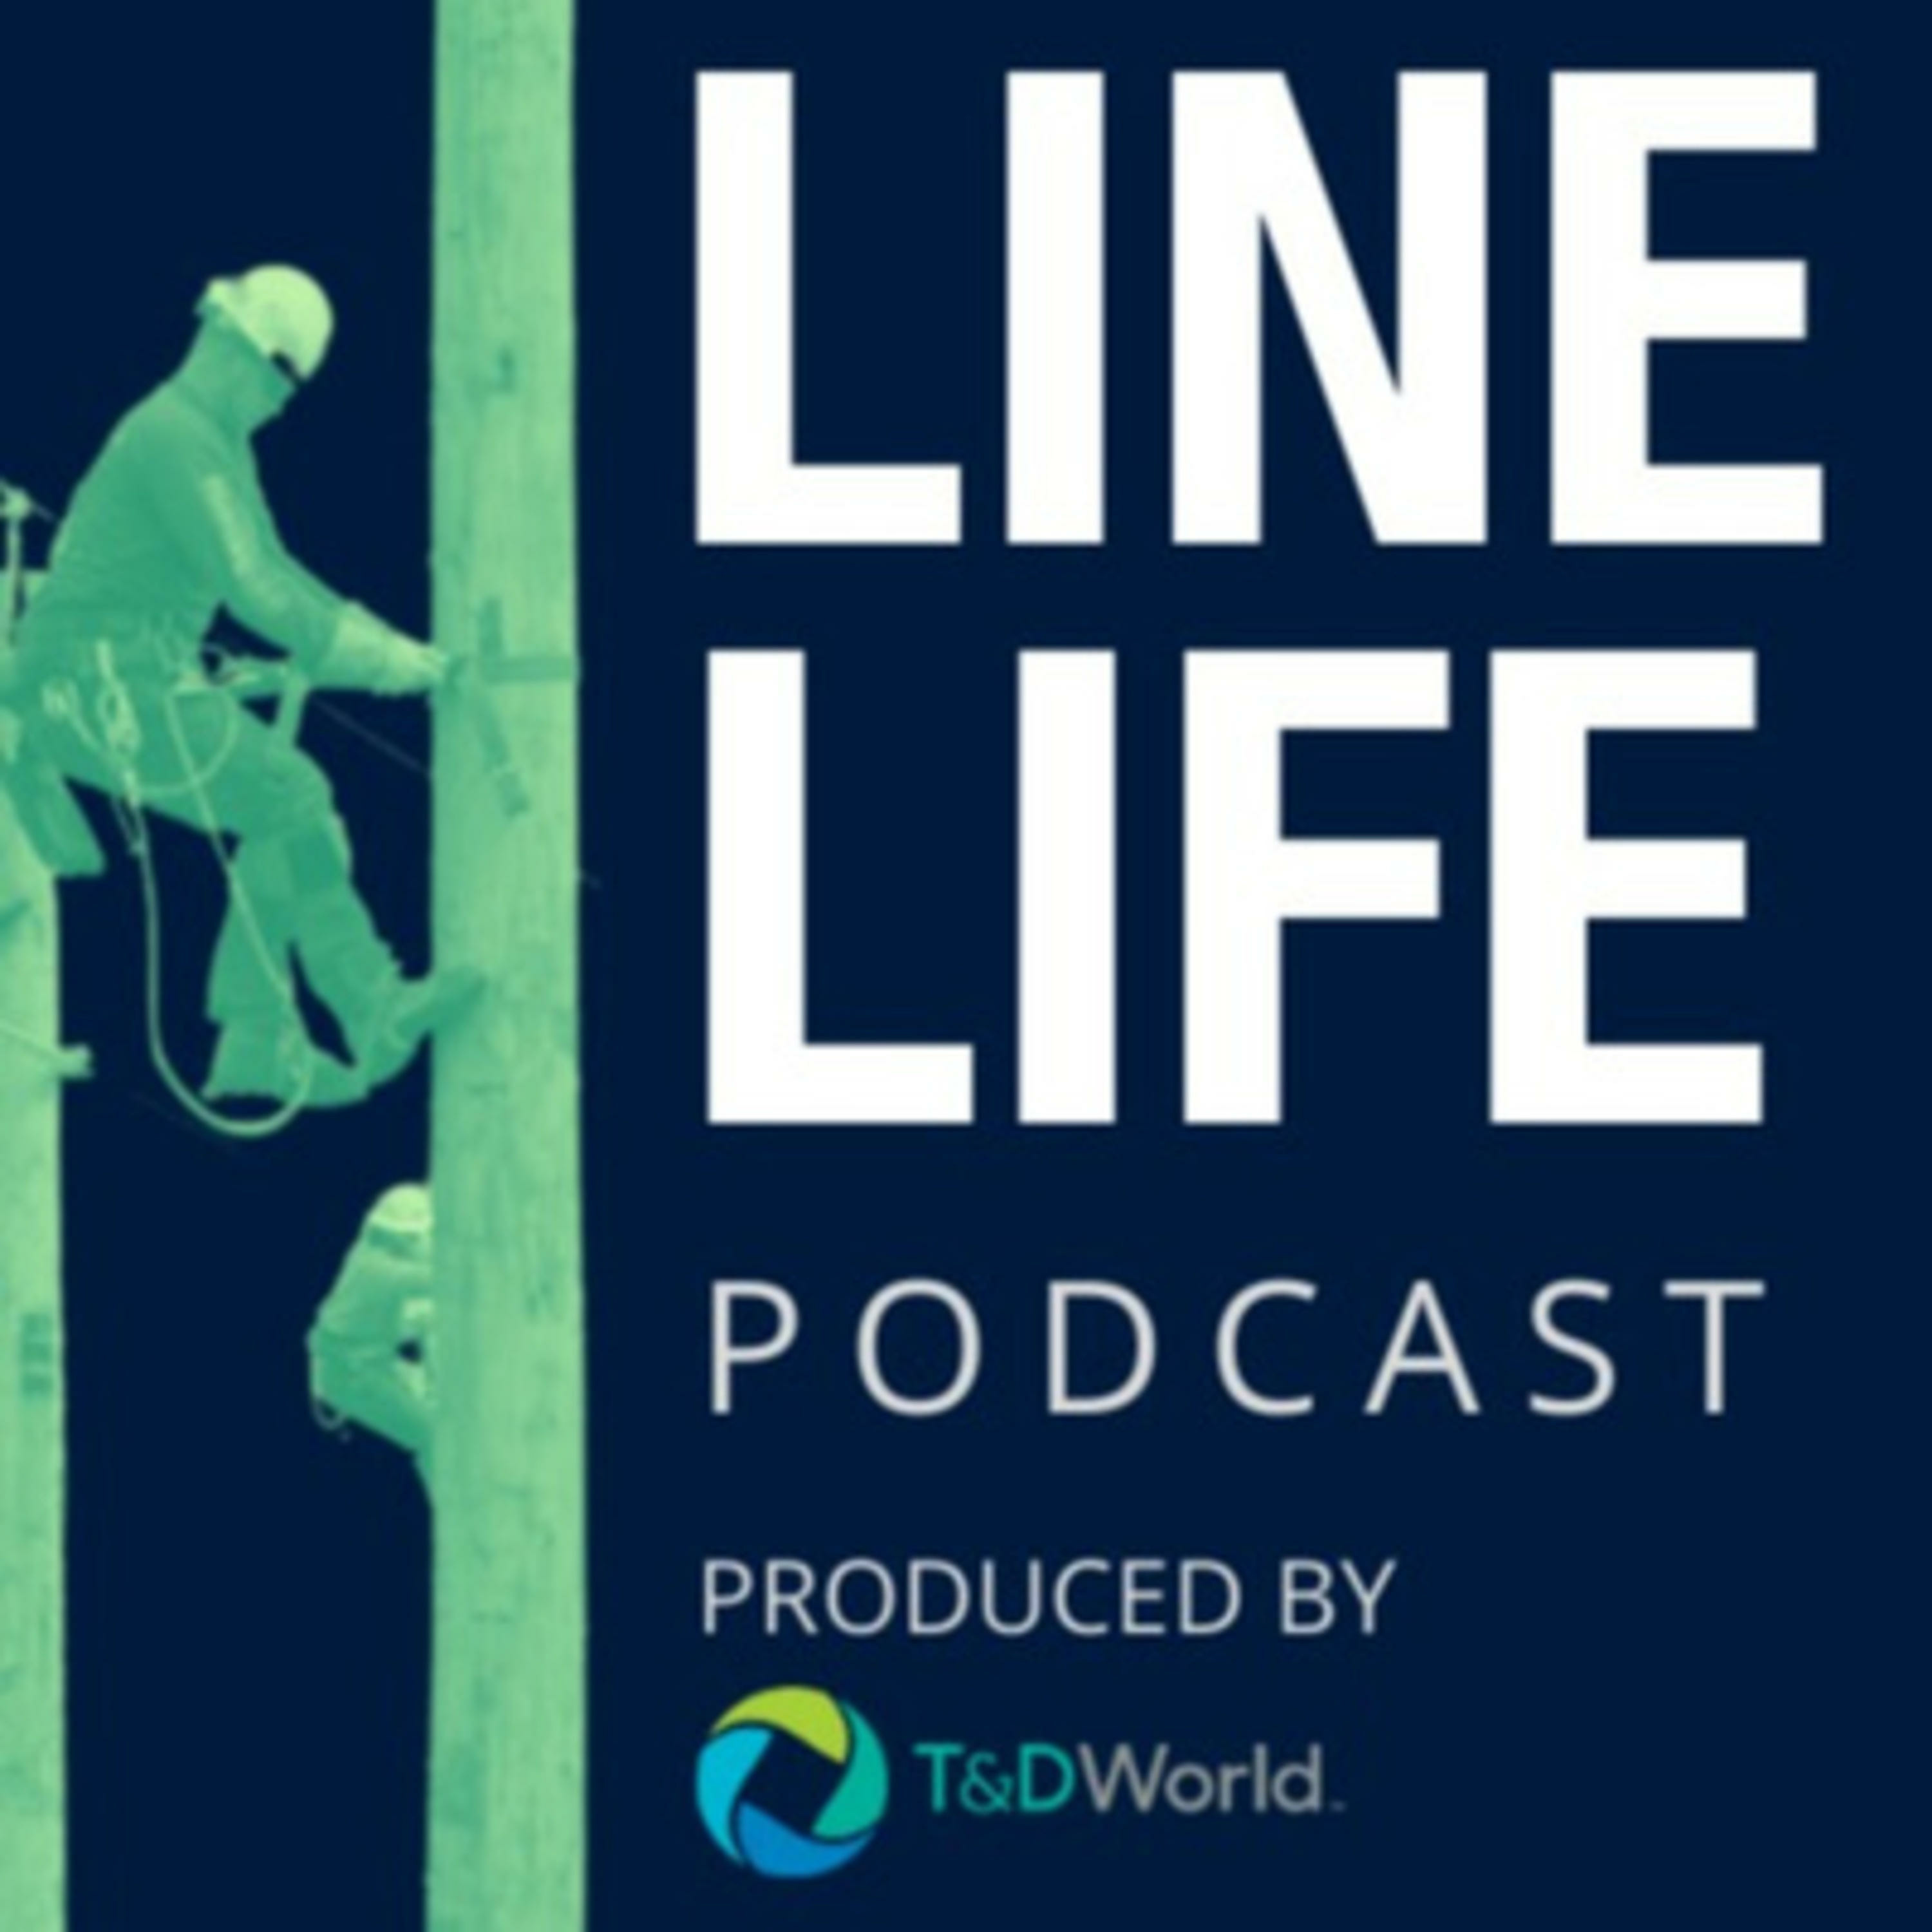 The Line Life Podcast